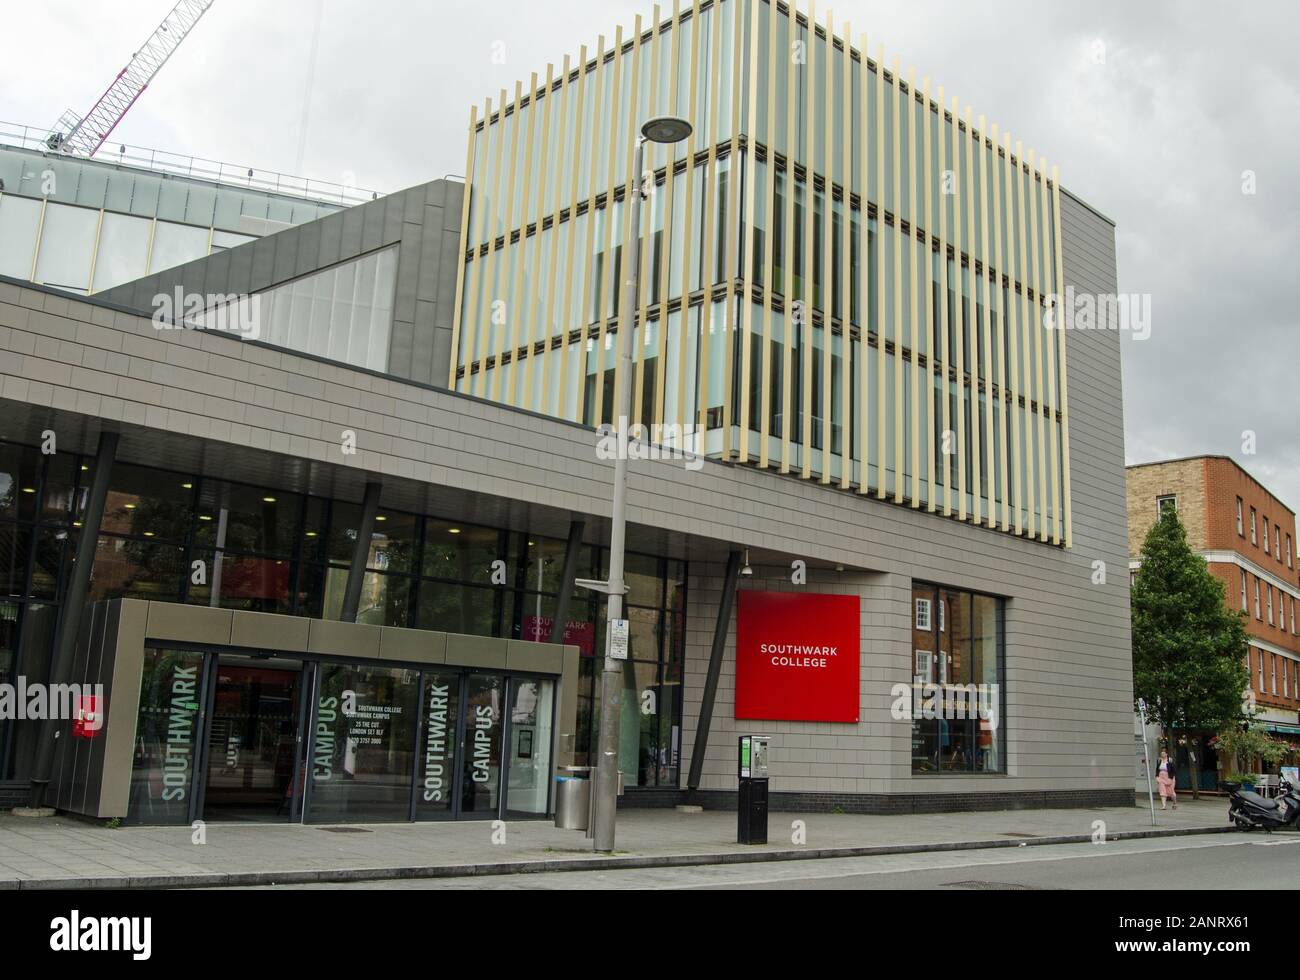 London, UK - July 20, 2019: Main entrance to Southwark College on The Cut in London. Stock Photo